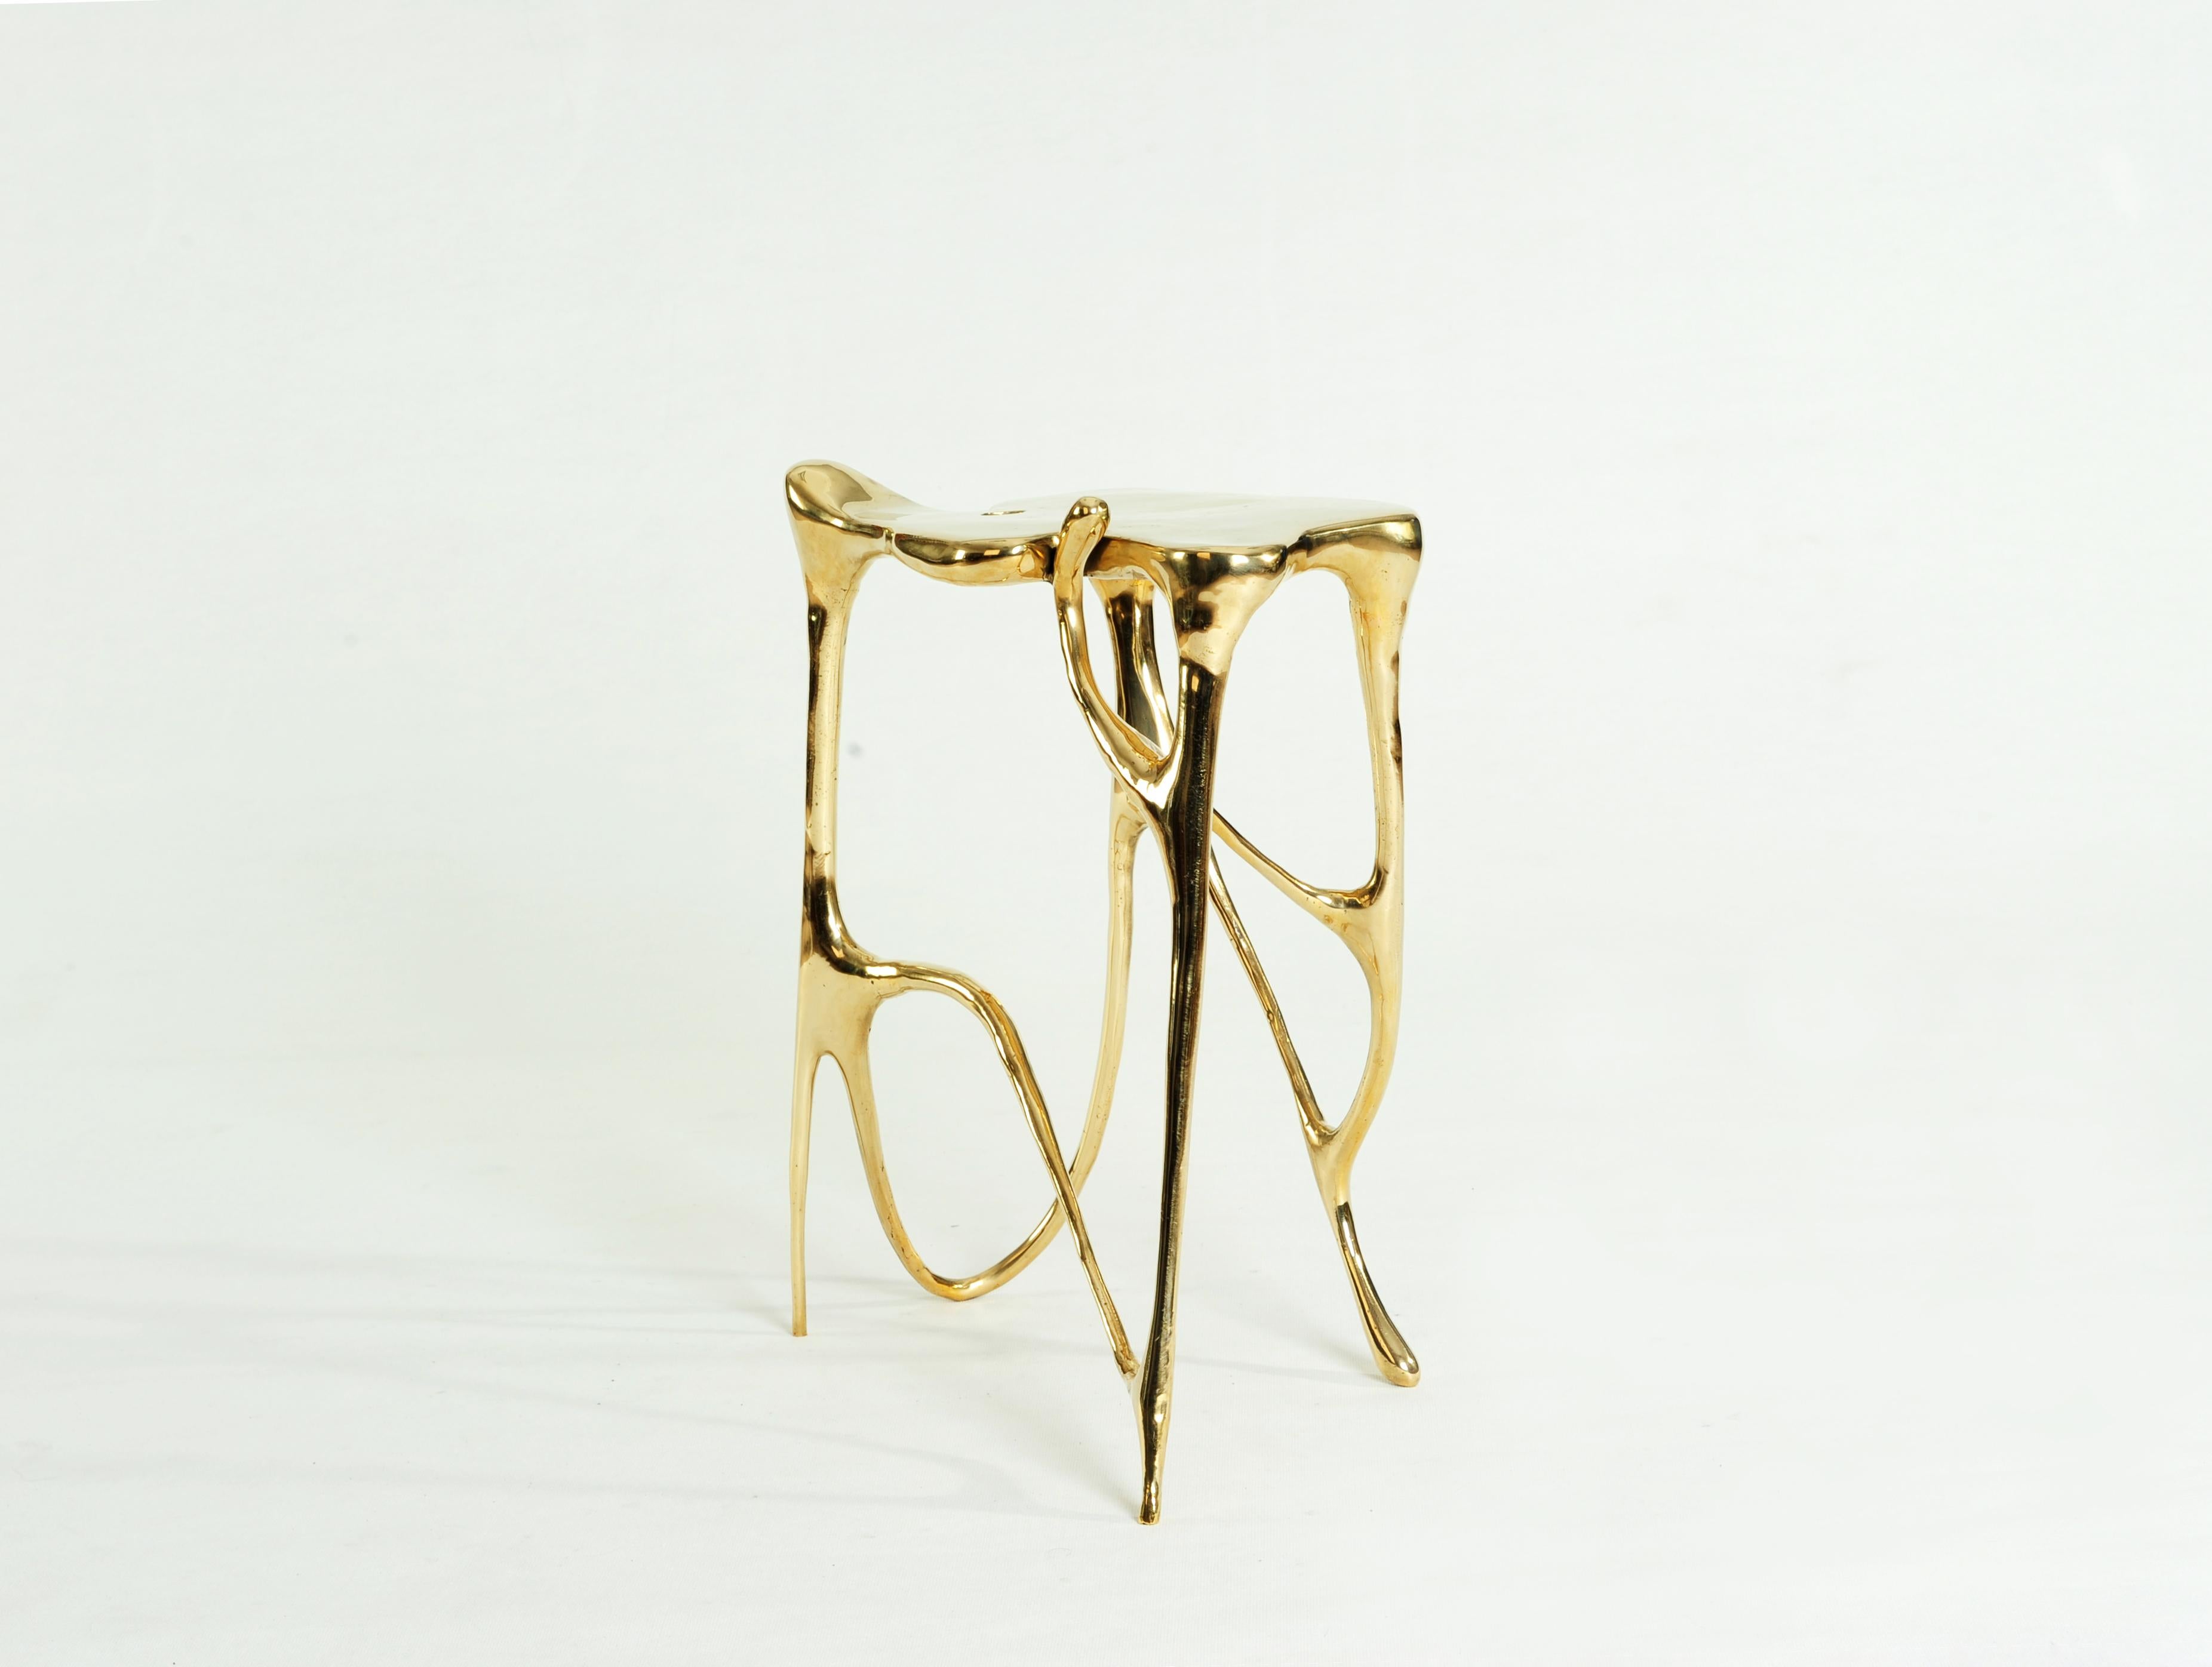 Calligraphic Sculpted Brass Side Table by Misaya For Sale 3